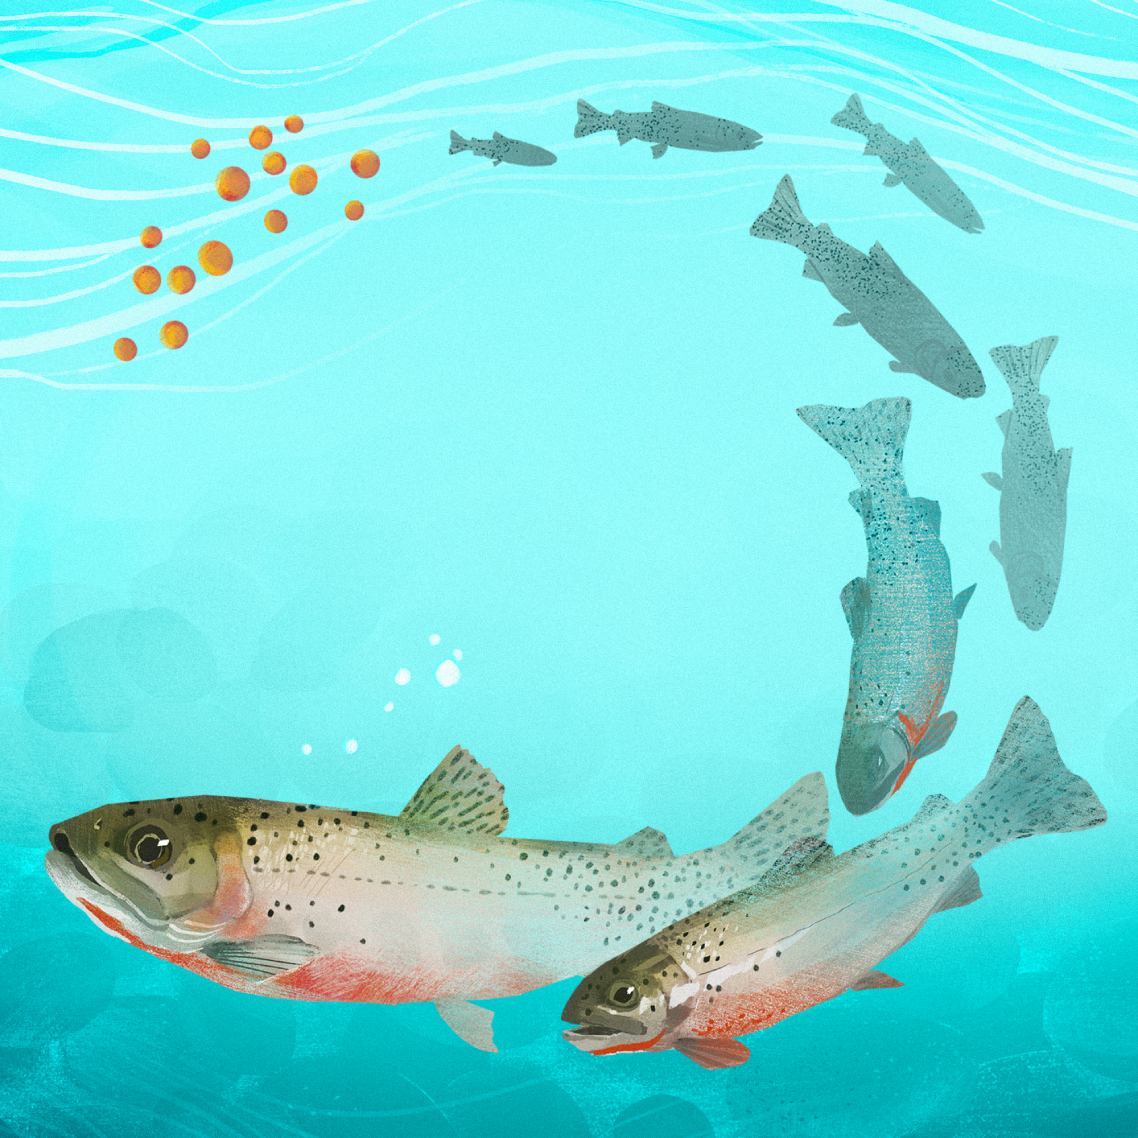 An illustration of fish eggs that progress to silhouettes of small fish, and eventually into adult sized fish shown in full colour .